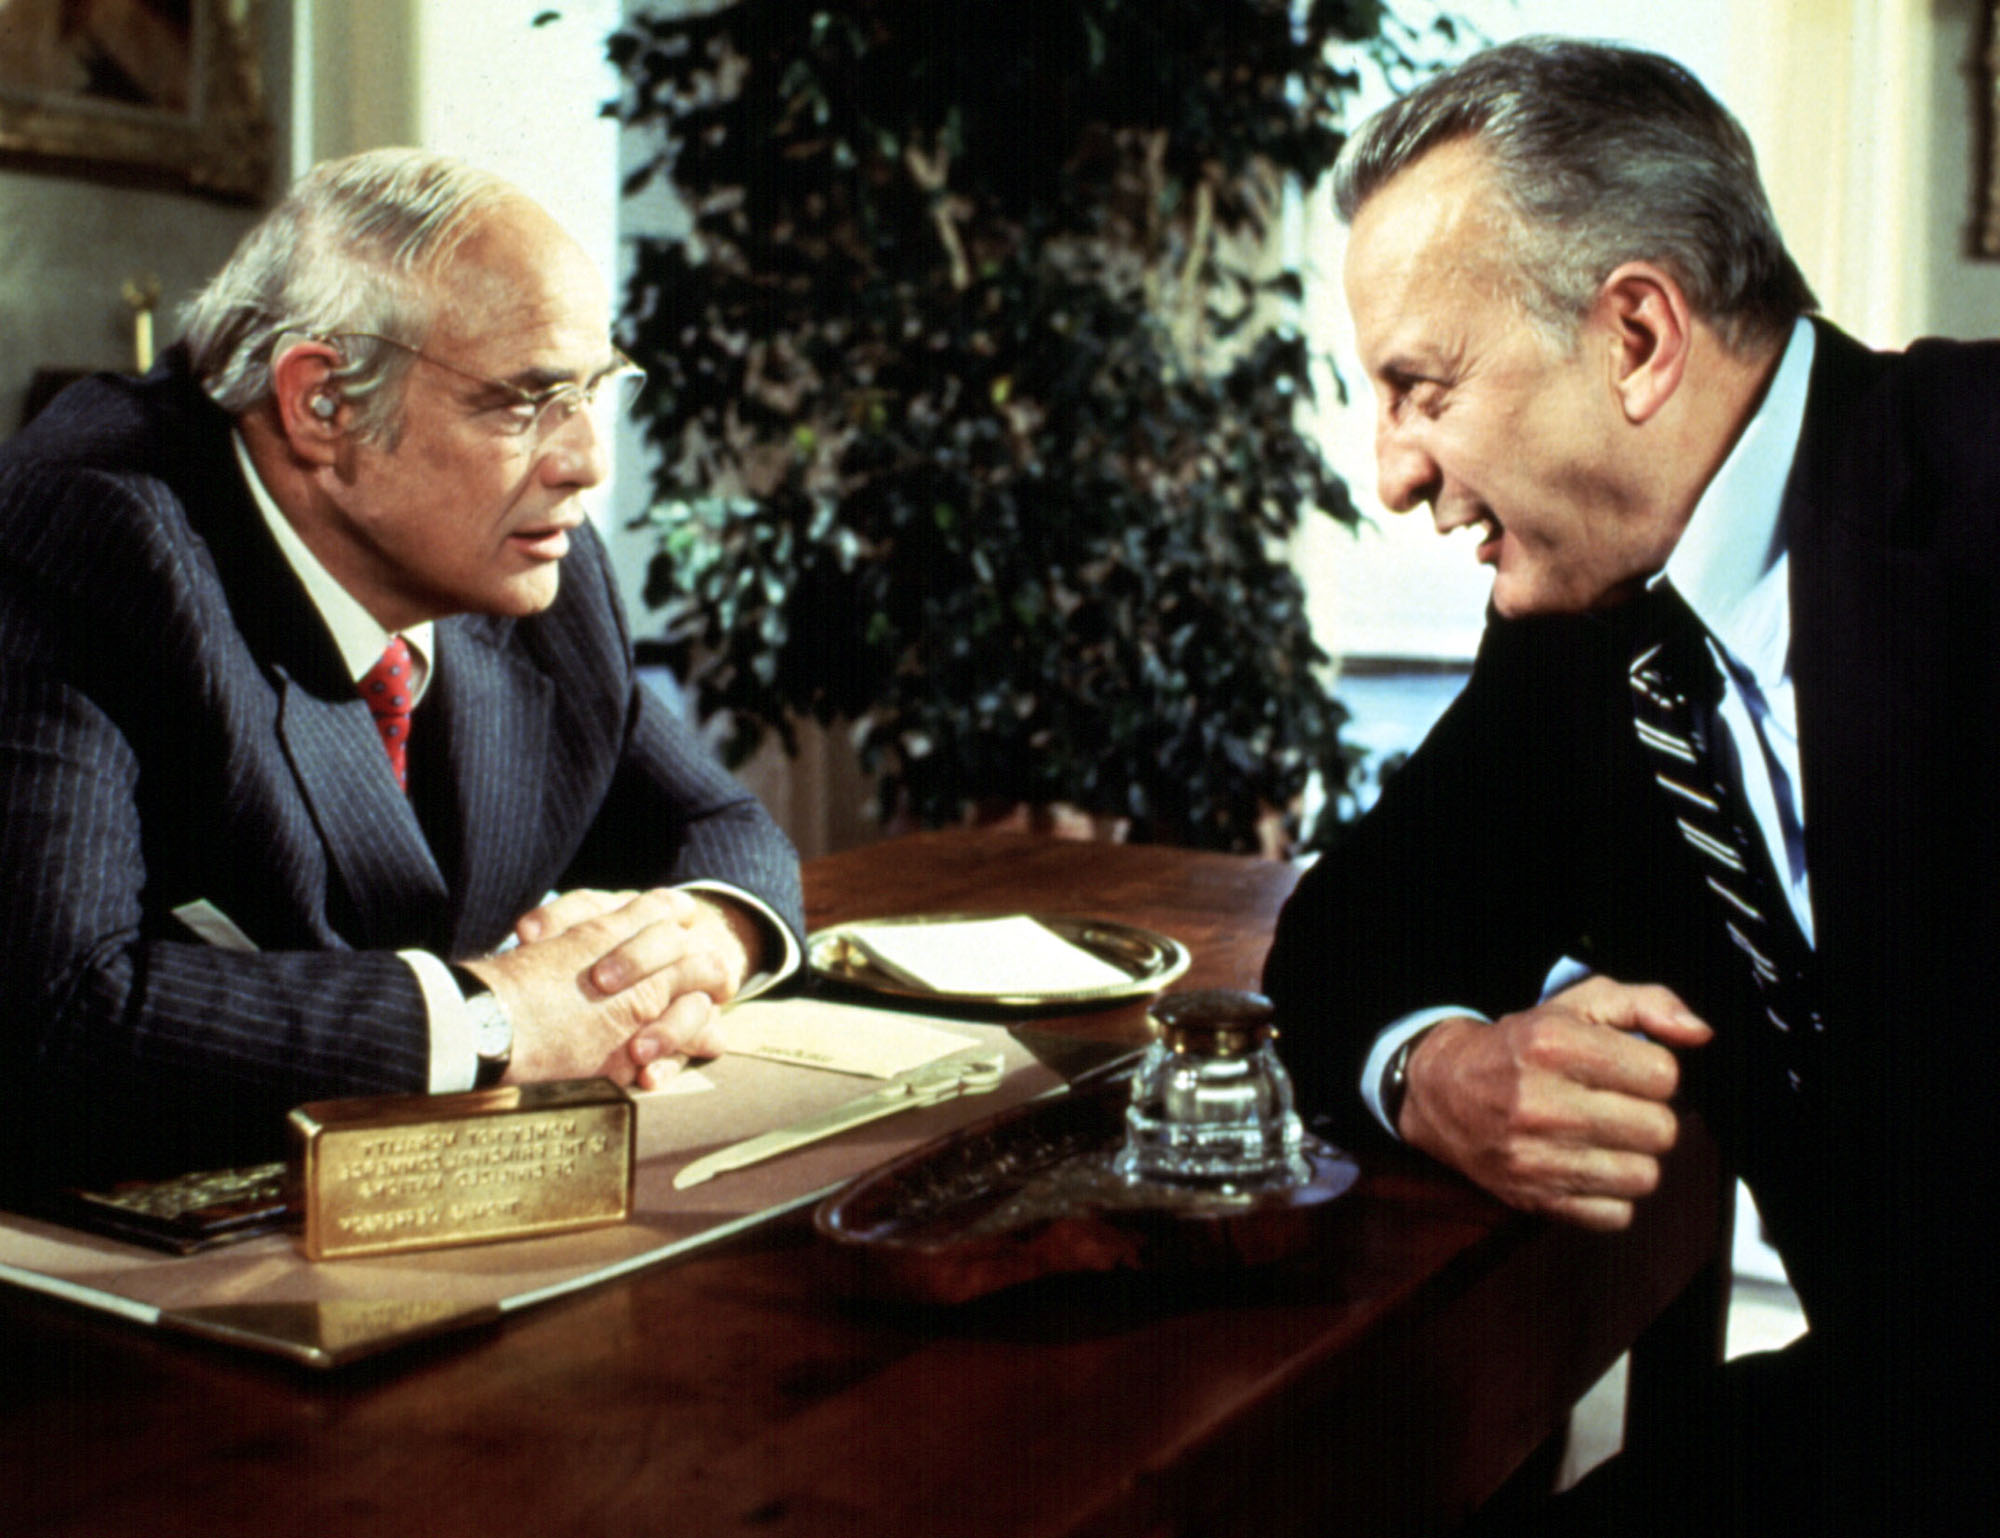 image from the 1980 film "The Formula." On the left, seated behind a desk, is Marlon Brando. Sitting just in front of him on the other side of the desk is George C. Scott. Their characters are leaned on the desk closing in toward each other, as if in argument.